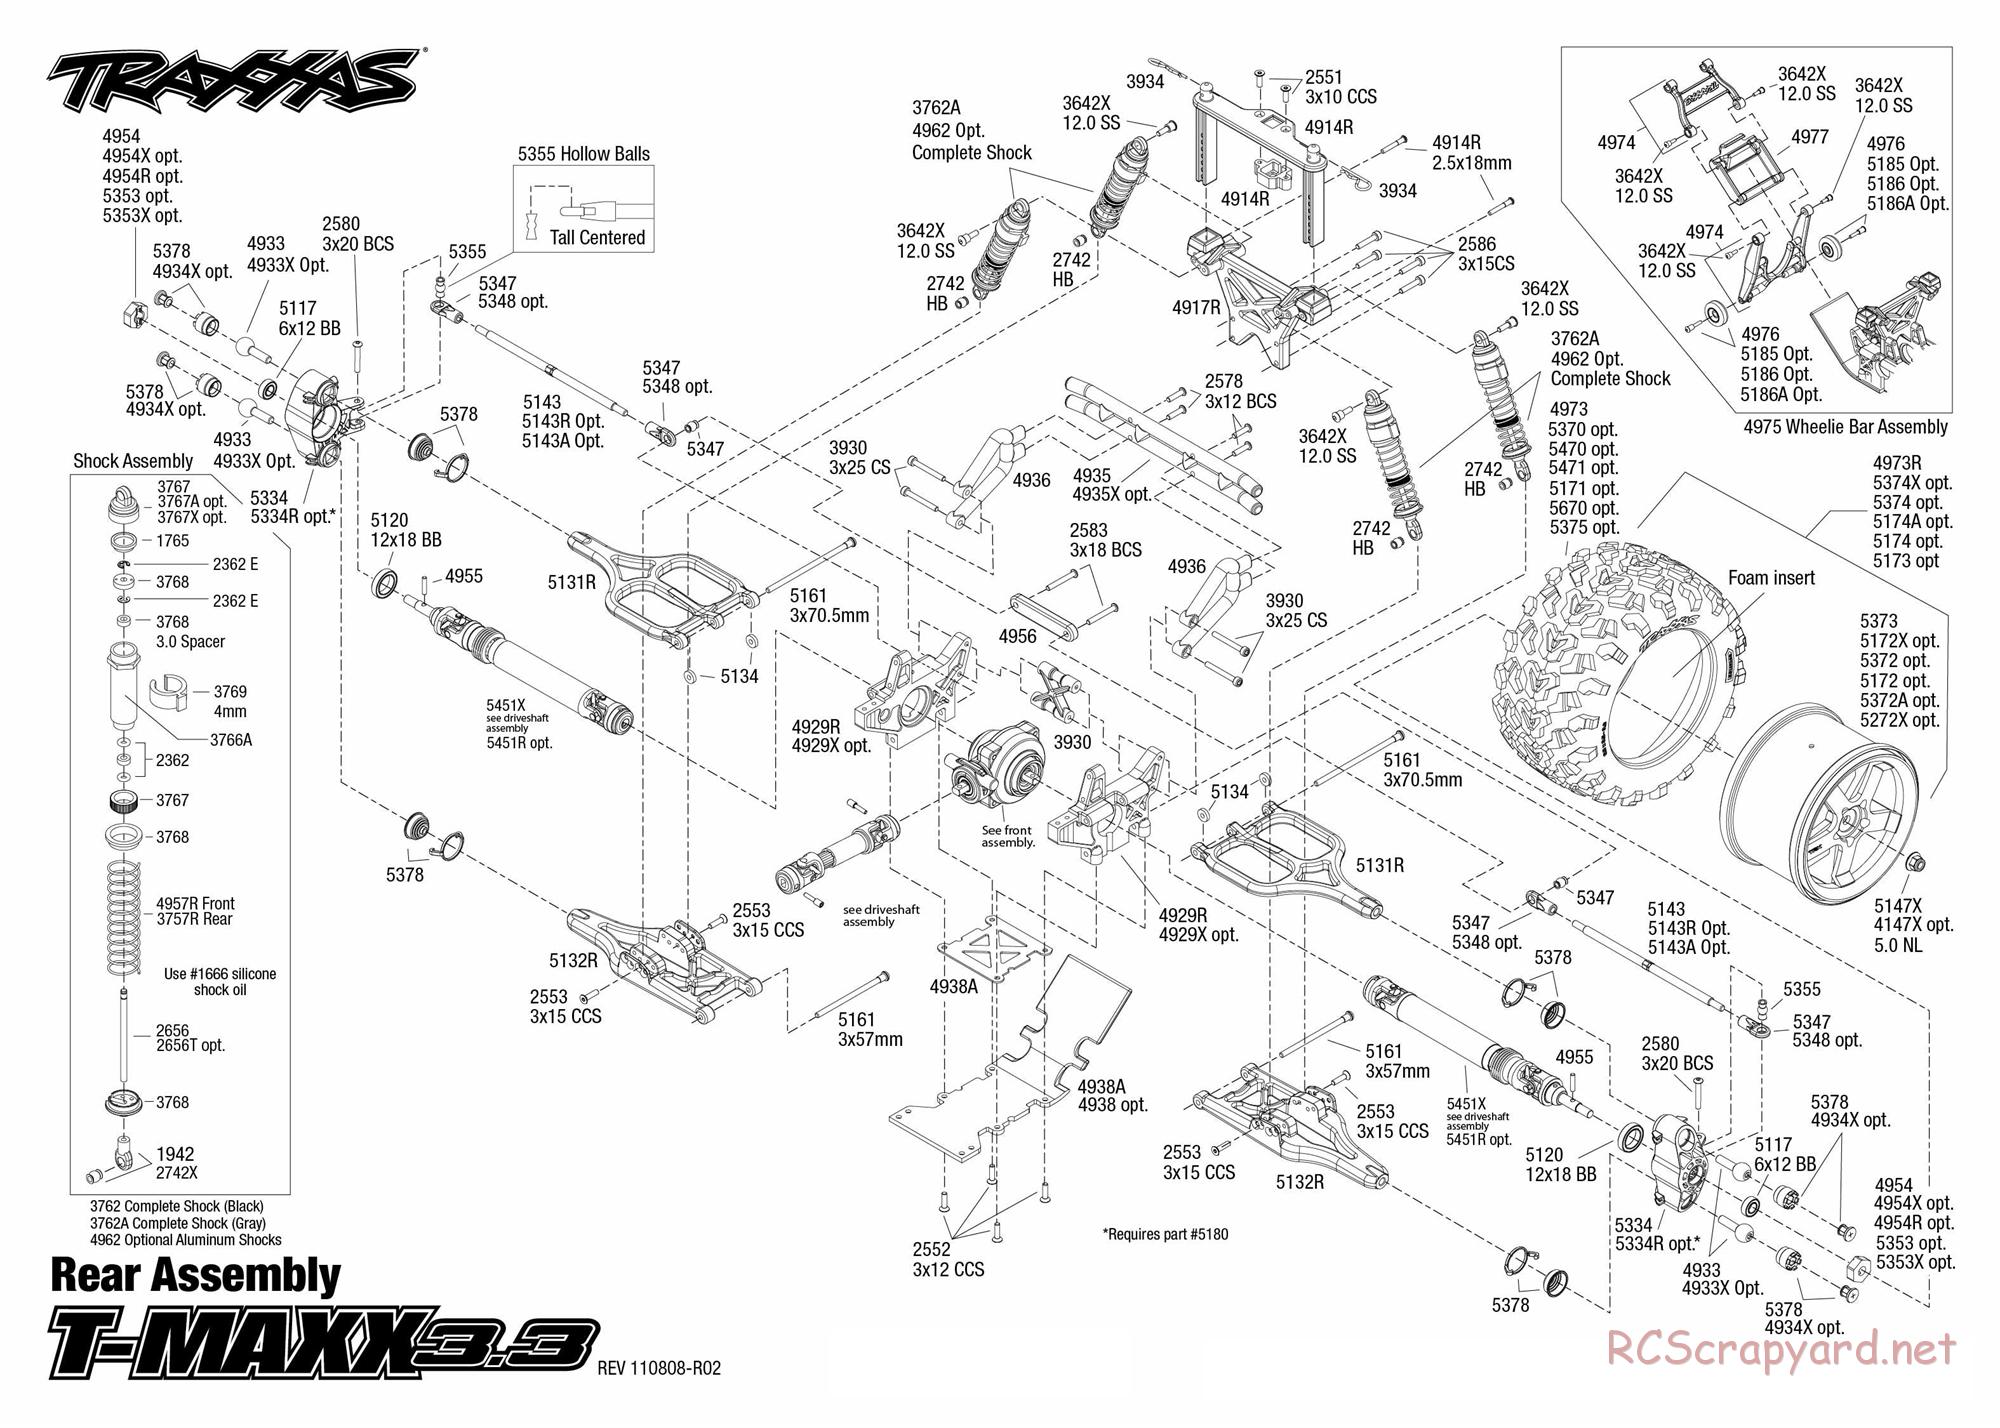 Traxxas - T-Maxx 3.3 (2010) - Exploded Views - Page 4